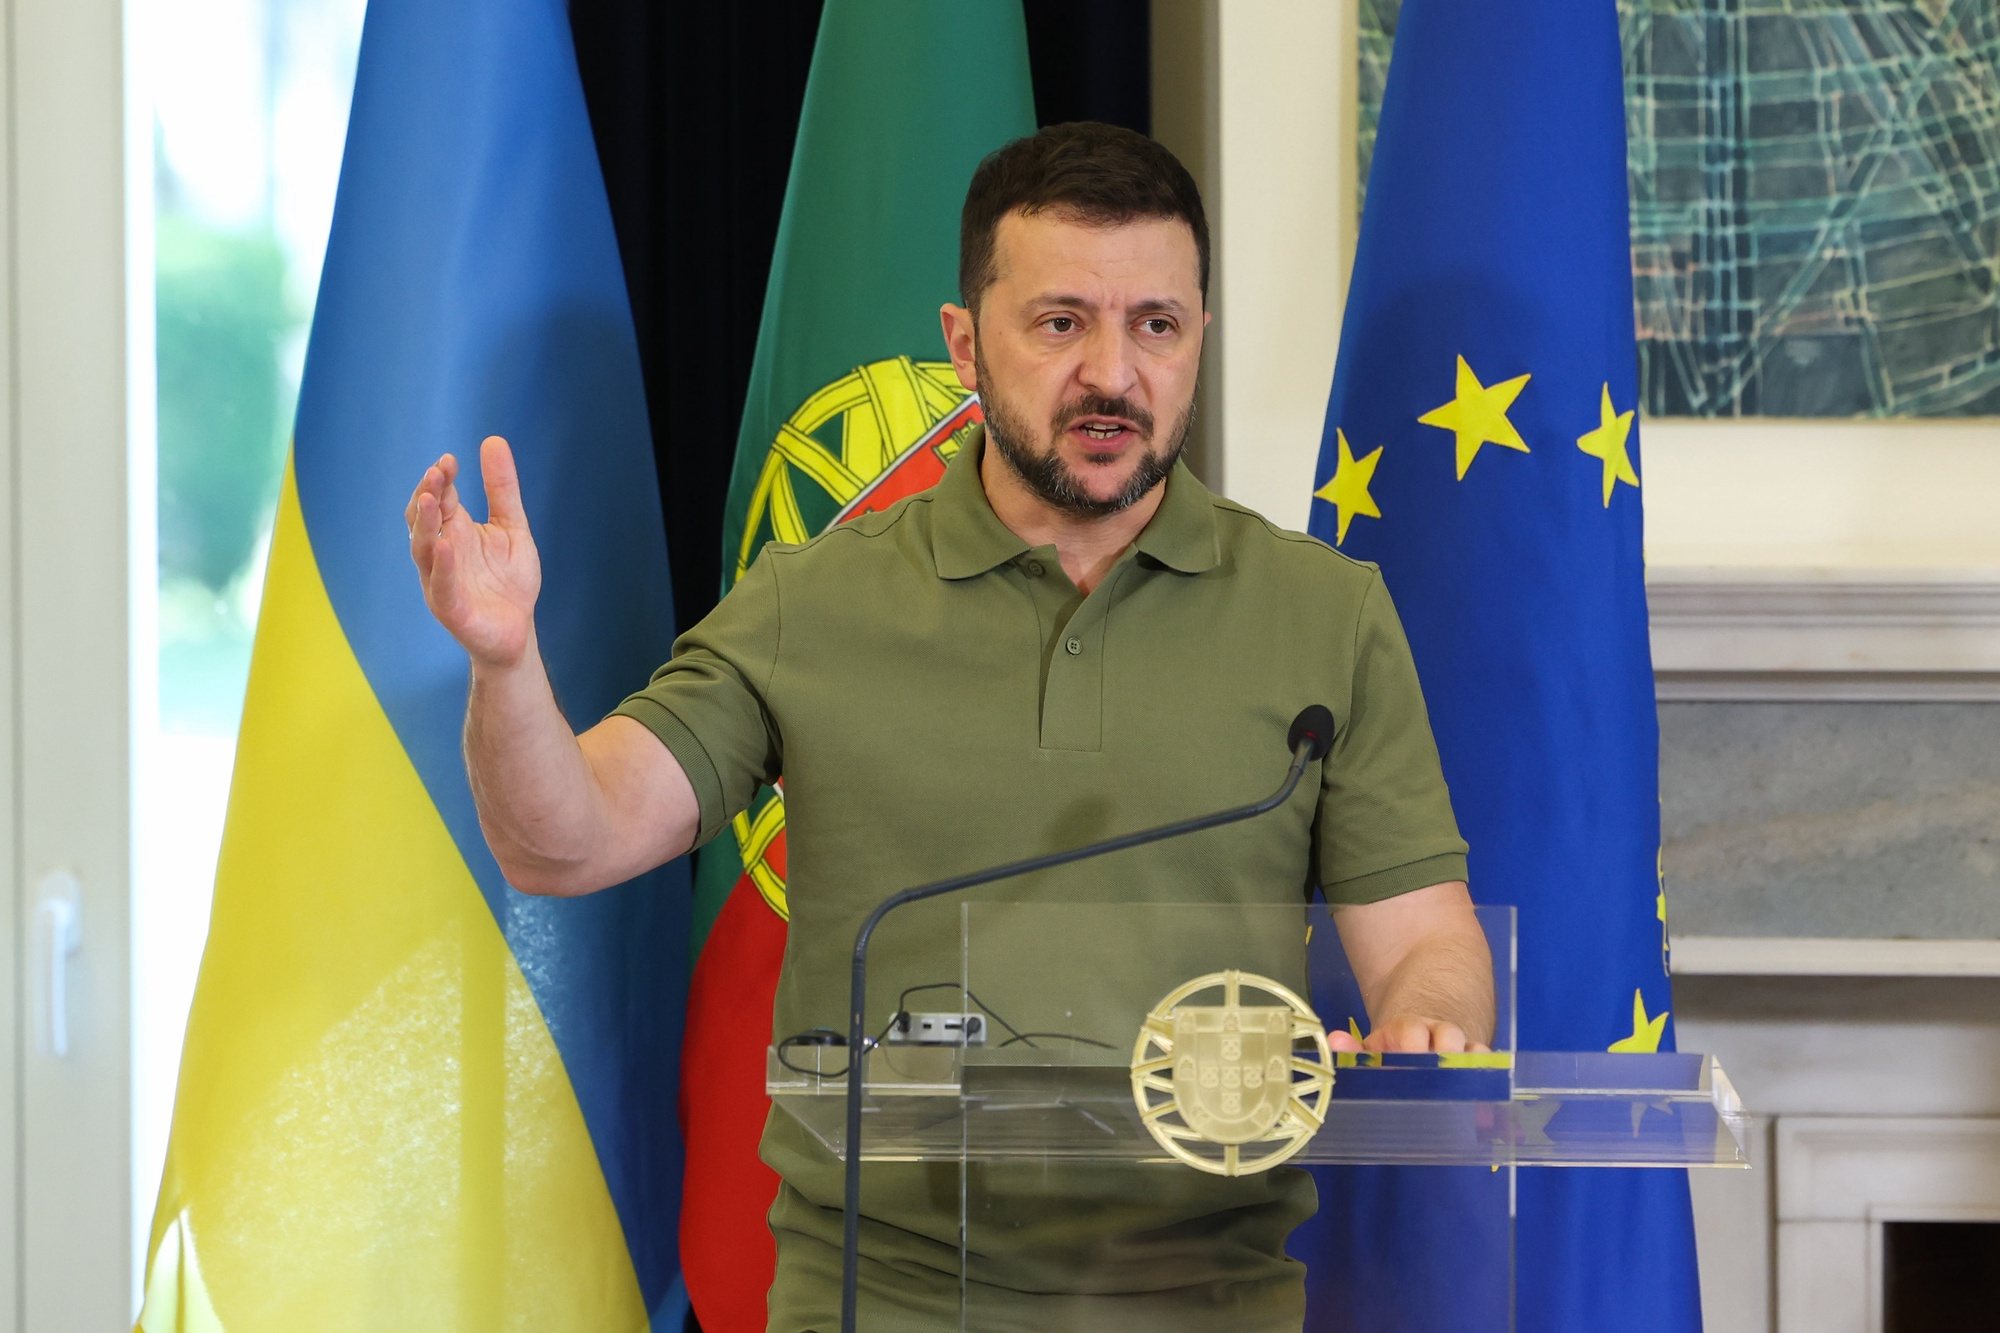 Ukraine&#039;s President Volodymyr Zelensky and portuguese prime minister Luis Montenegro (not pictured) during a joint statement, after a meeting at Sao Bento Palace in Lisbon, Portugal, 28 May 2024. According to this note, released simultaneously by the office of the prime minister, Luís Montenegro, &quot;President Zelensky&#039;s working visit is part of the shared intention to deepen the excellent relations between the two states, with a particular focus on strengthening cooperation in the field of security and defence&quot;. JOSE SENA GOULAO/LUSA/POOL